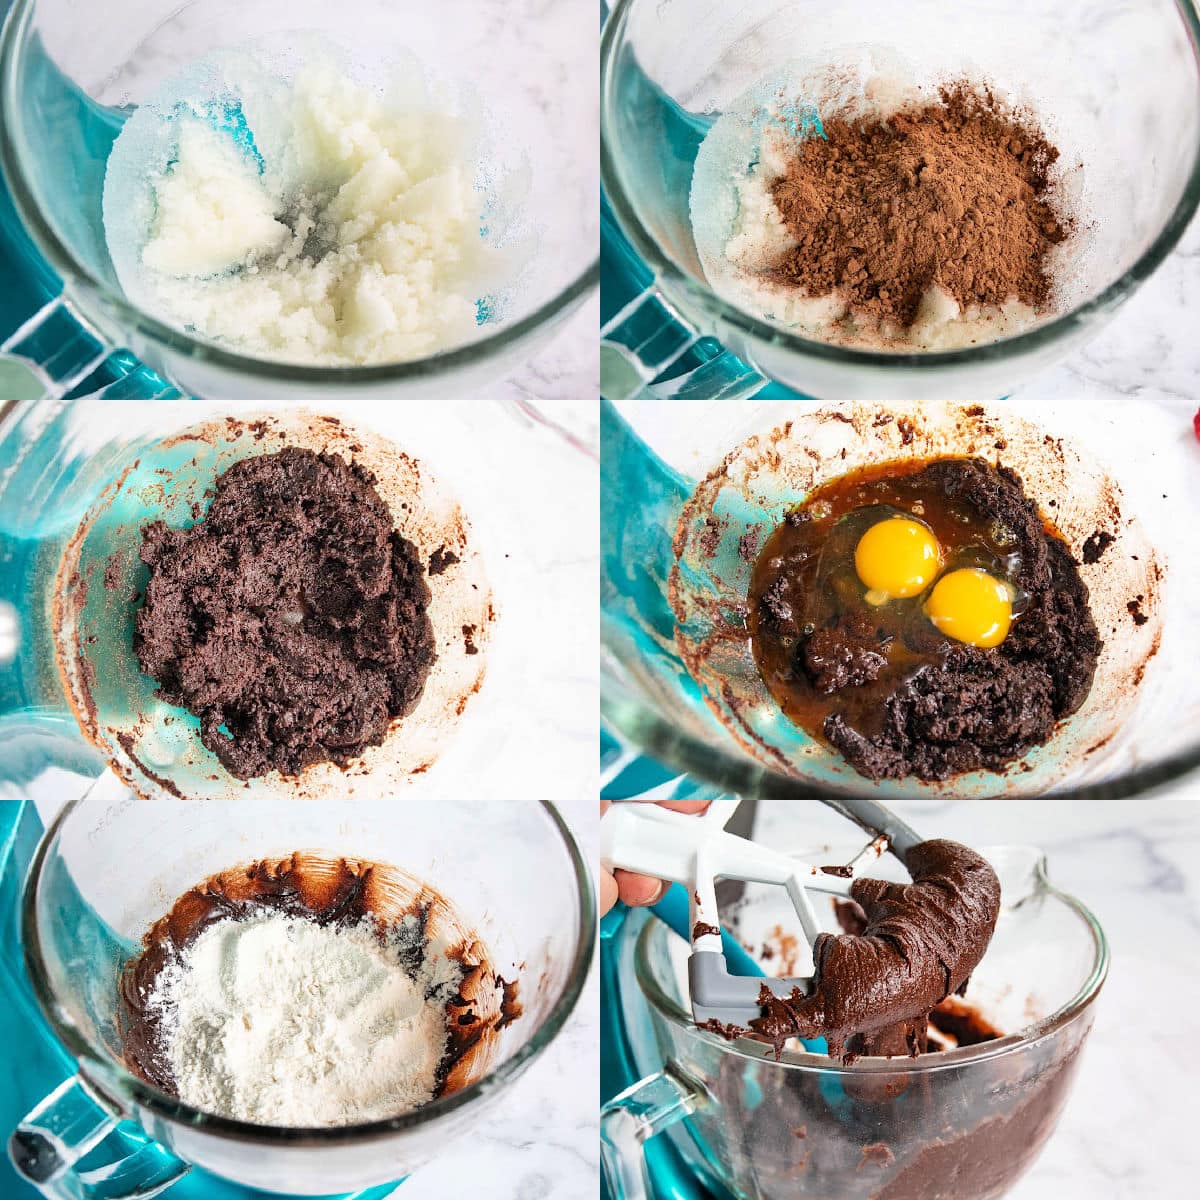 how to make chocolate crinkle cookies dough in a six image collage showing step by step.